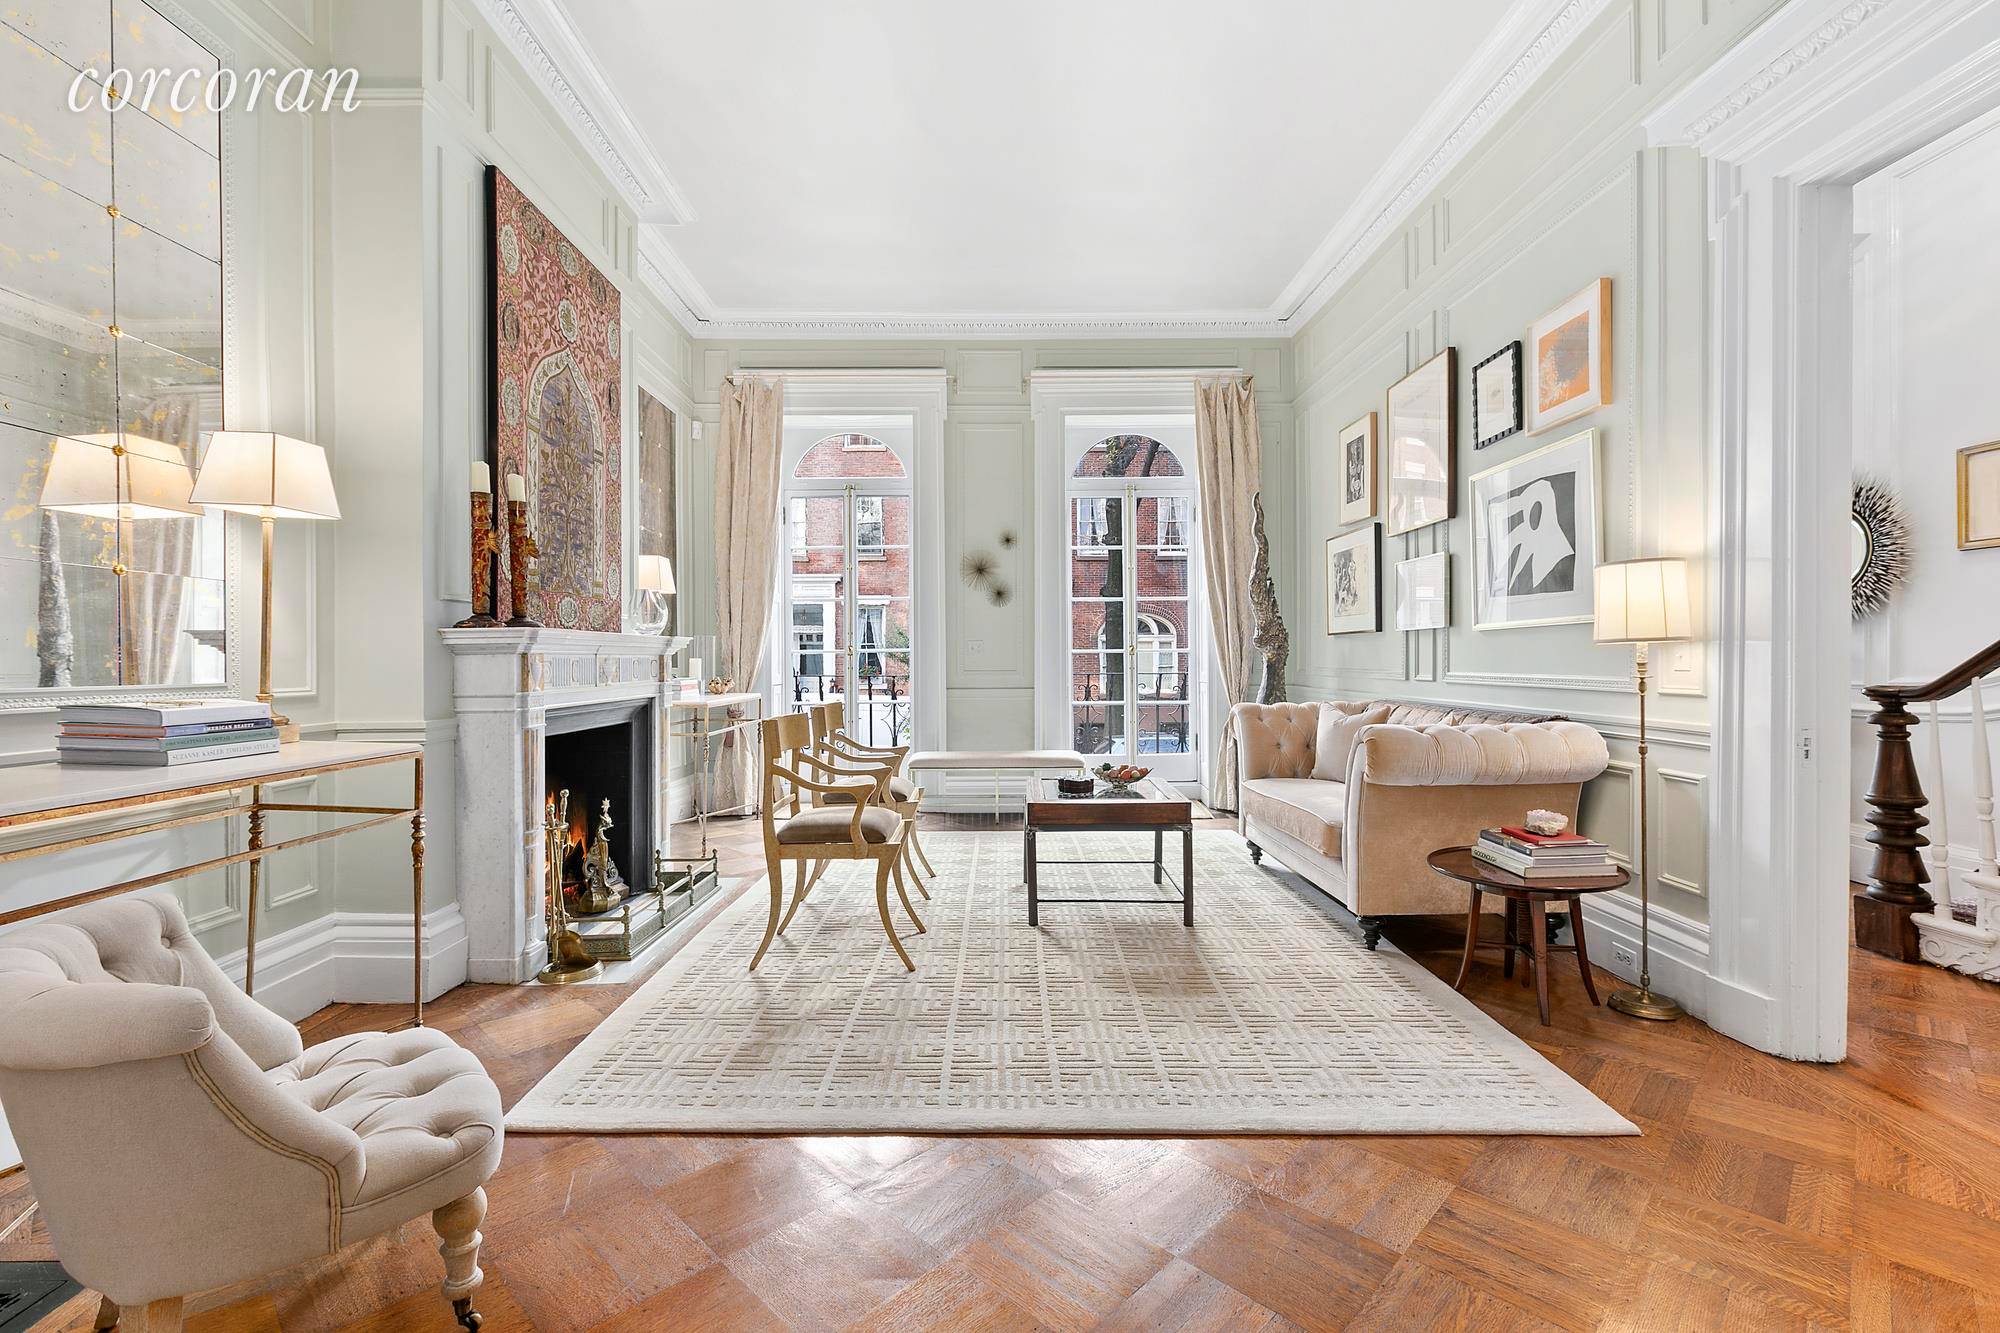 Located on a prime Gold Coast block in the landmarked neighborhood of Greenwich Village, a beautiful and historic home is now on the market.